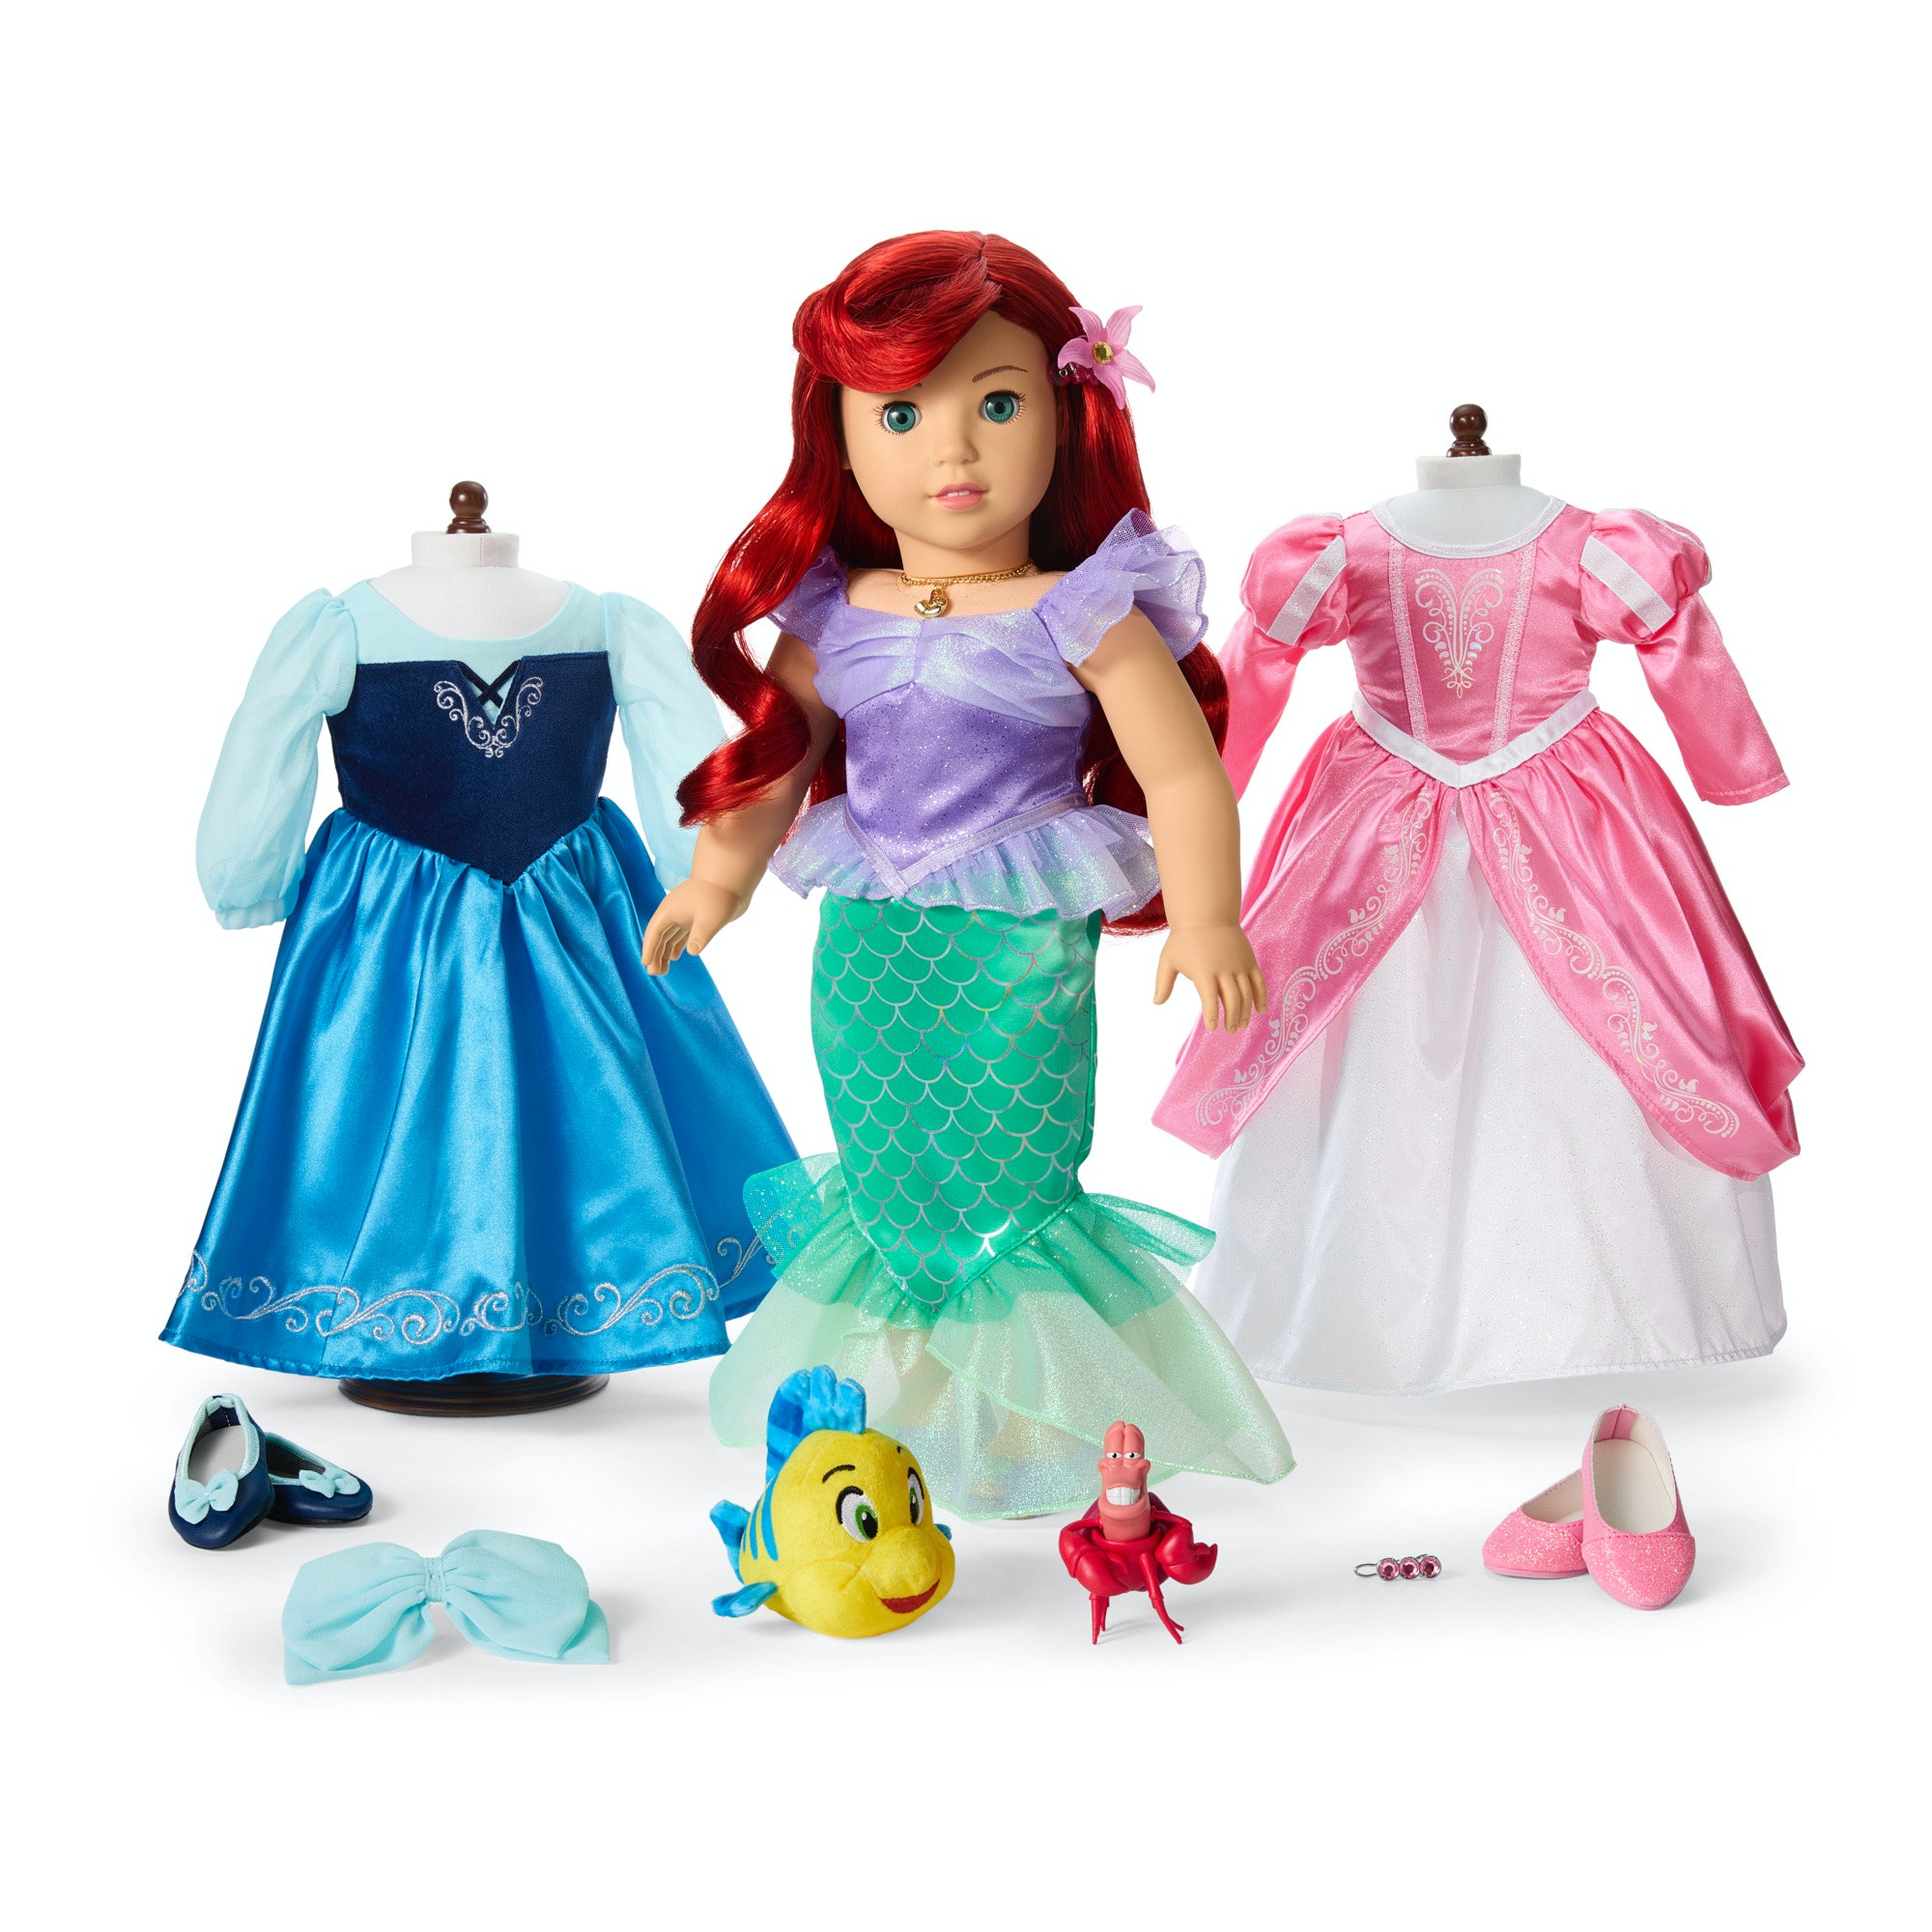 american-girl-is-releasing-a-new,-more-affordable-line-of-disney-princess-dolls